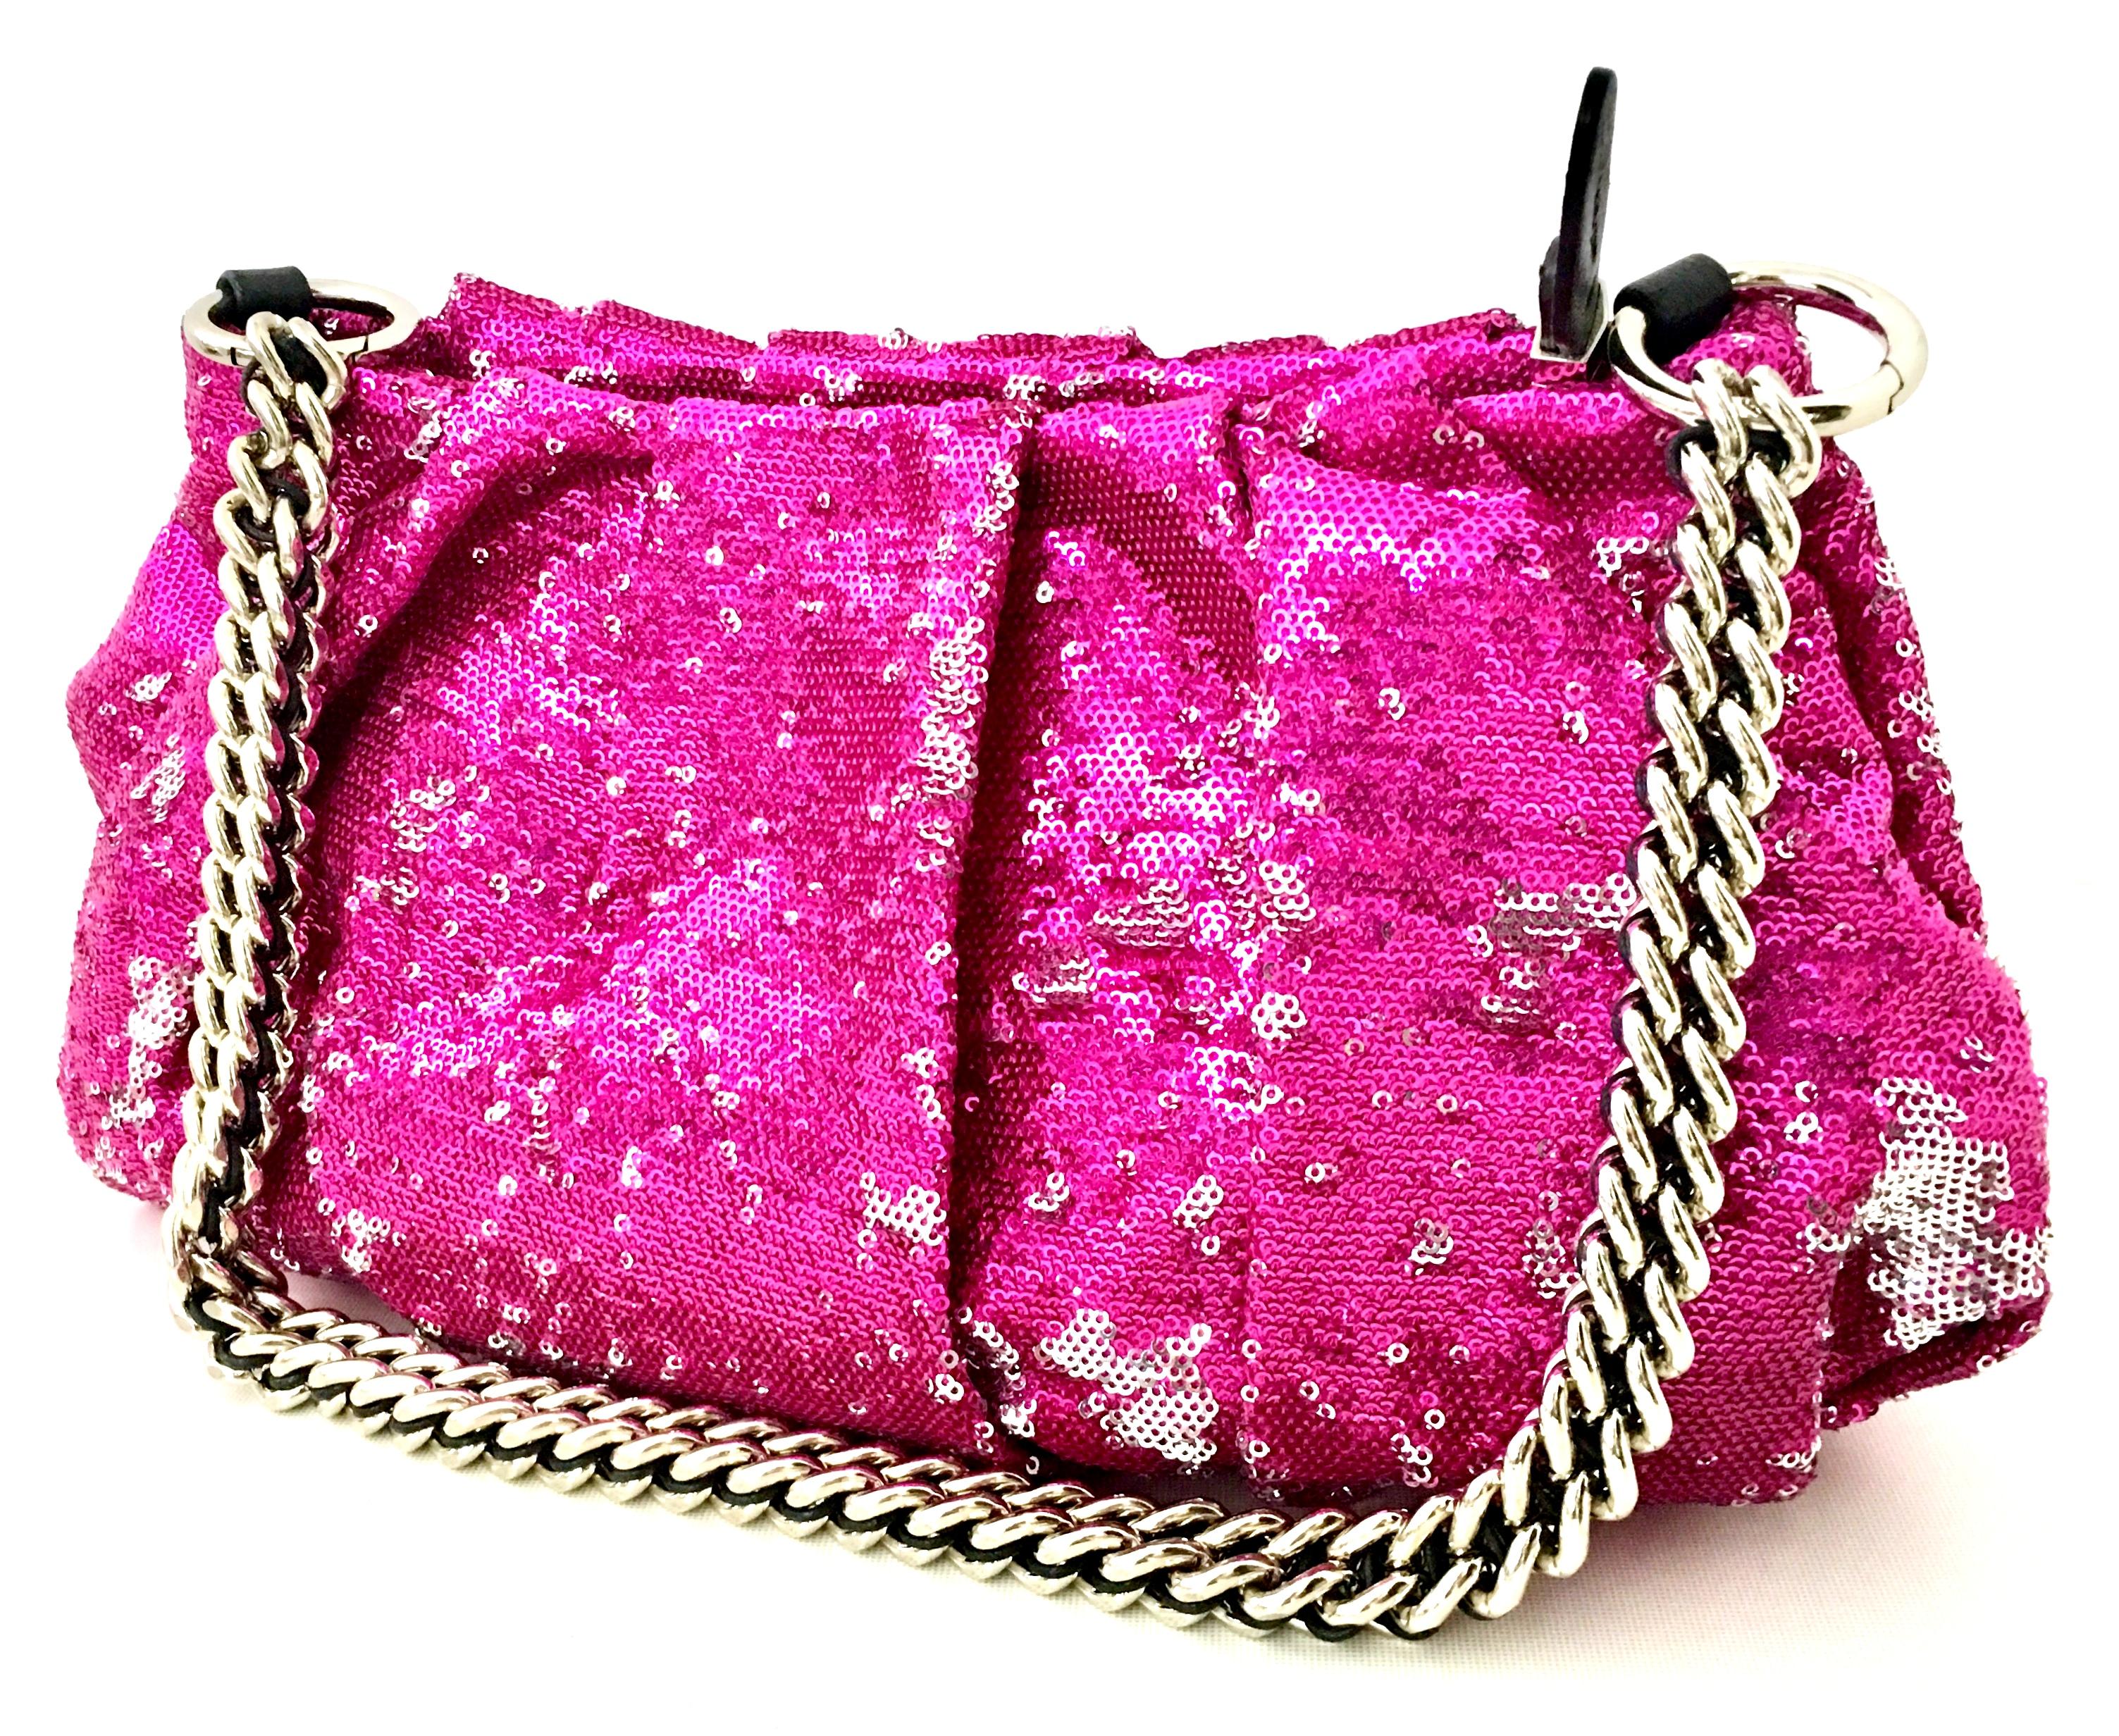 21st Century Contemporary Silver & Fuchsia Reversible Sequin Leather and Chrome Shoulder or Clutch Hand Bag By,  ORYanny. This new and never used hand bag features a silver chrome and leather chain link removable shoulder strap, The 